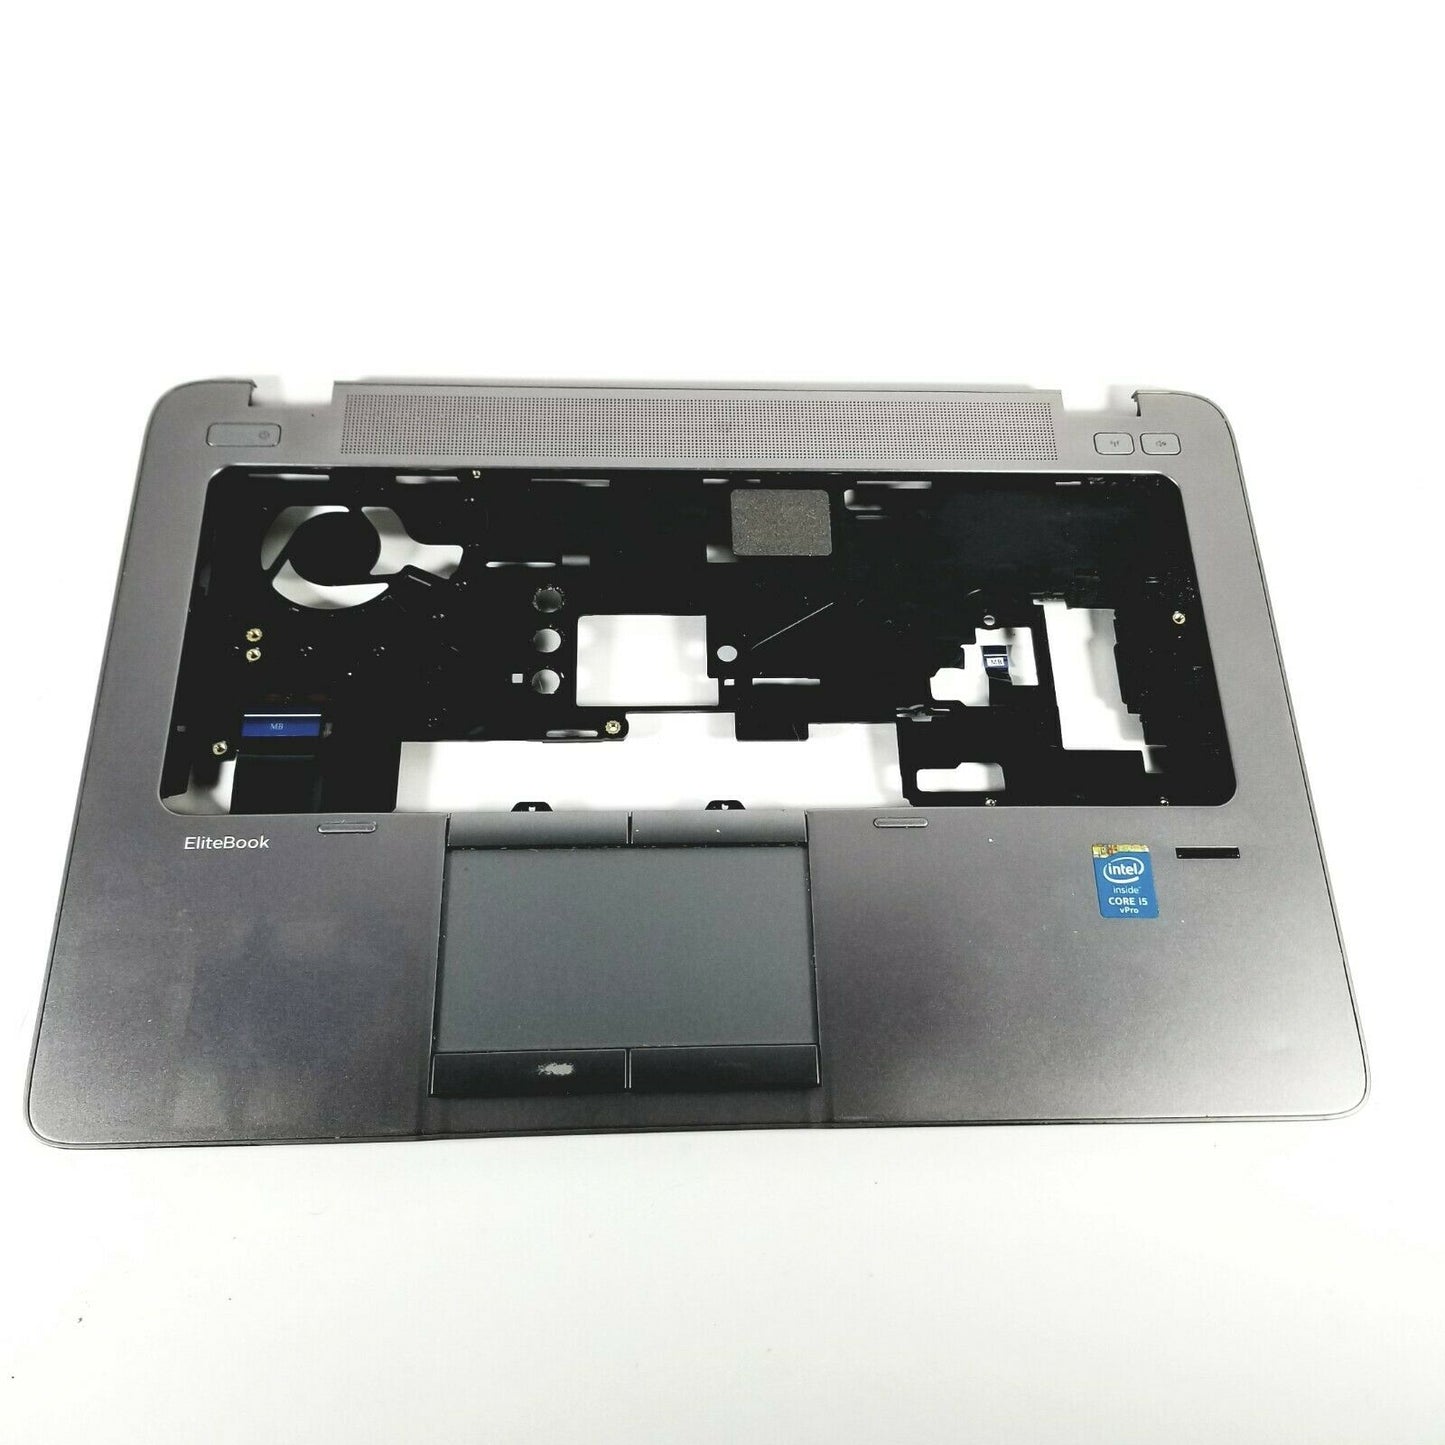 HP 840G2 UPPER CPU COVER (CHASSIS TOP)